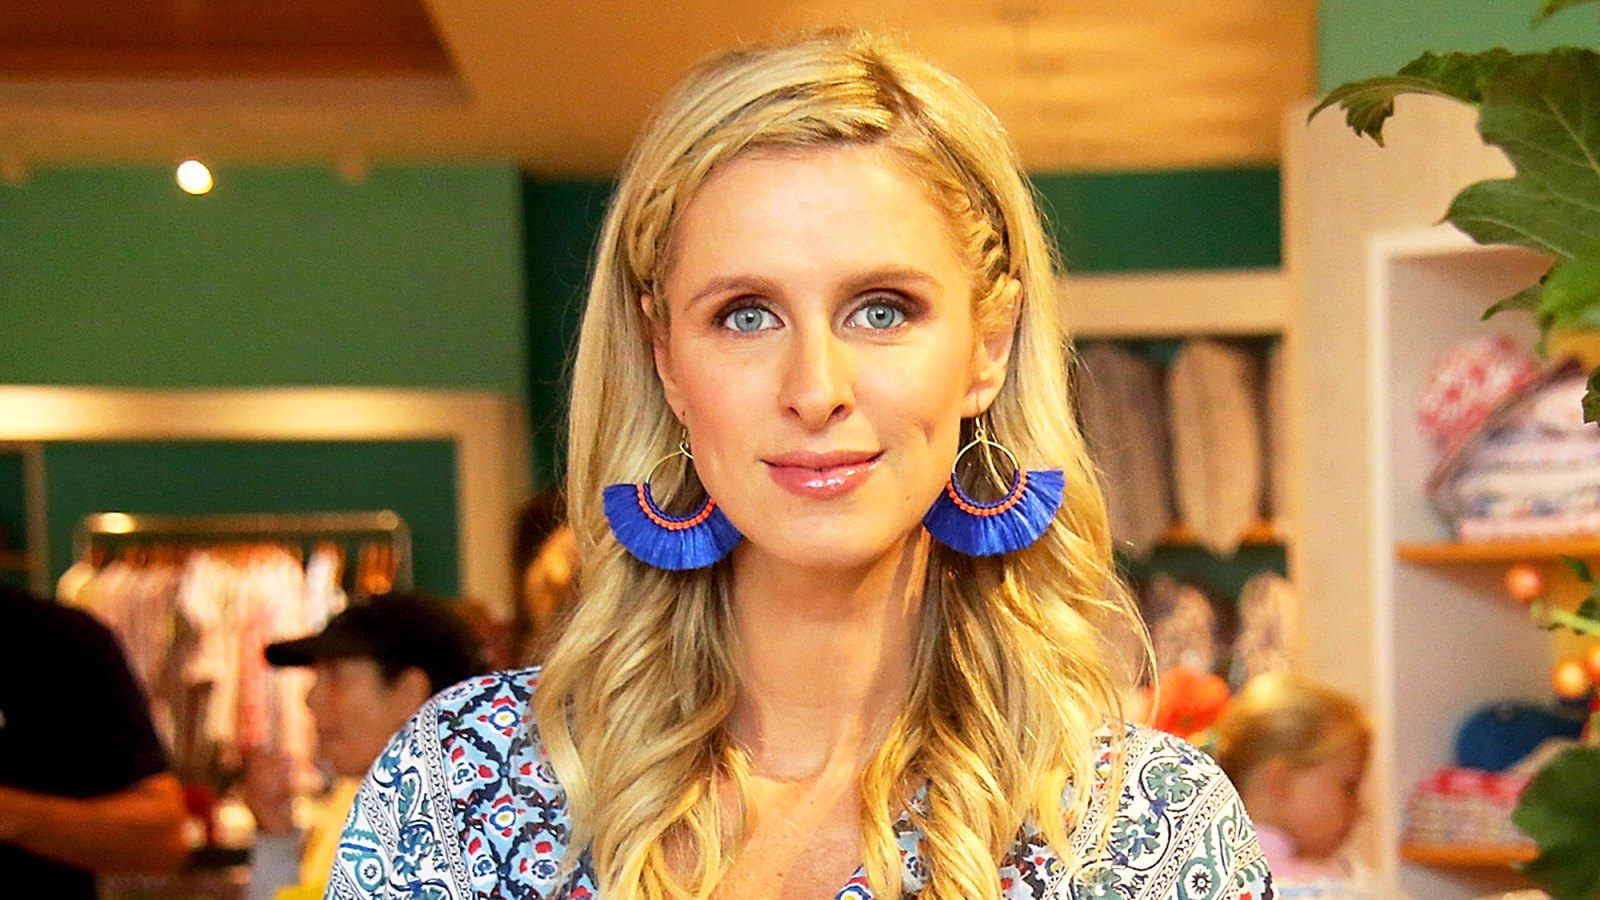 Nicky Hilton attends the Roller Rabbit Charity Shopping Event to benefit Animal Haven in East Hampton, New York.